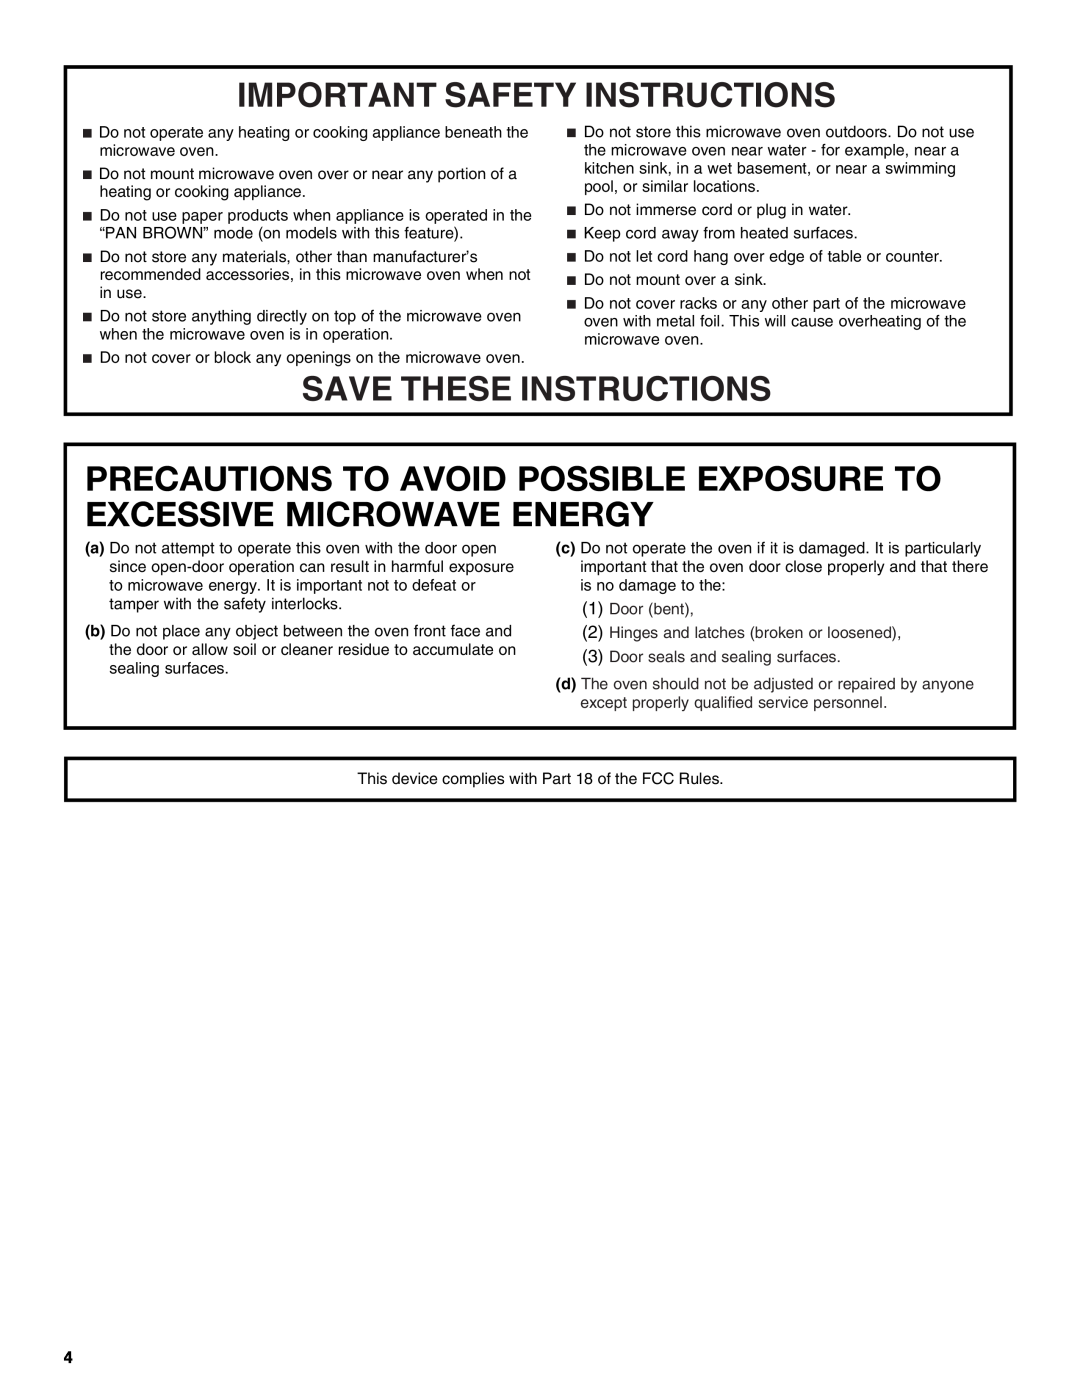 Whirlpool MT4155 manual Precautions To Avoid Possible Exposure To Excessive Microwave Energy, Important Safety Instructions 